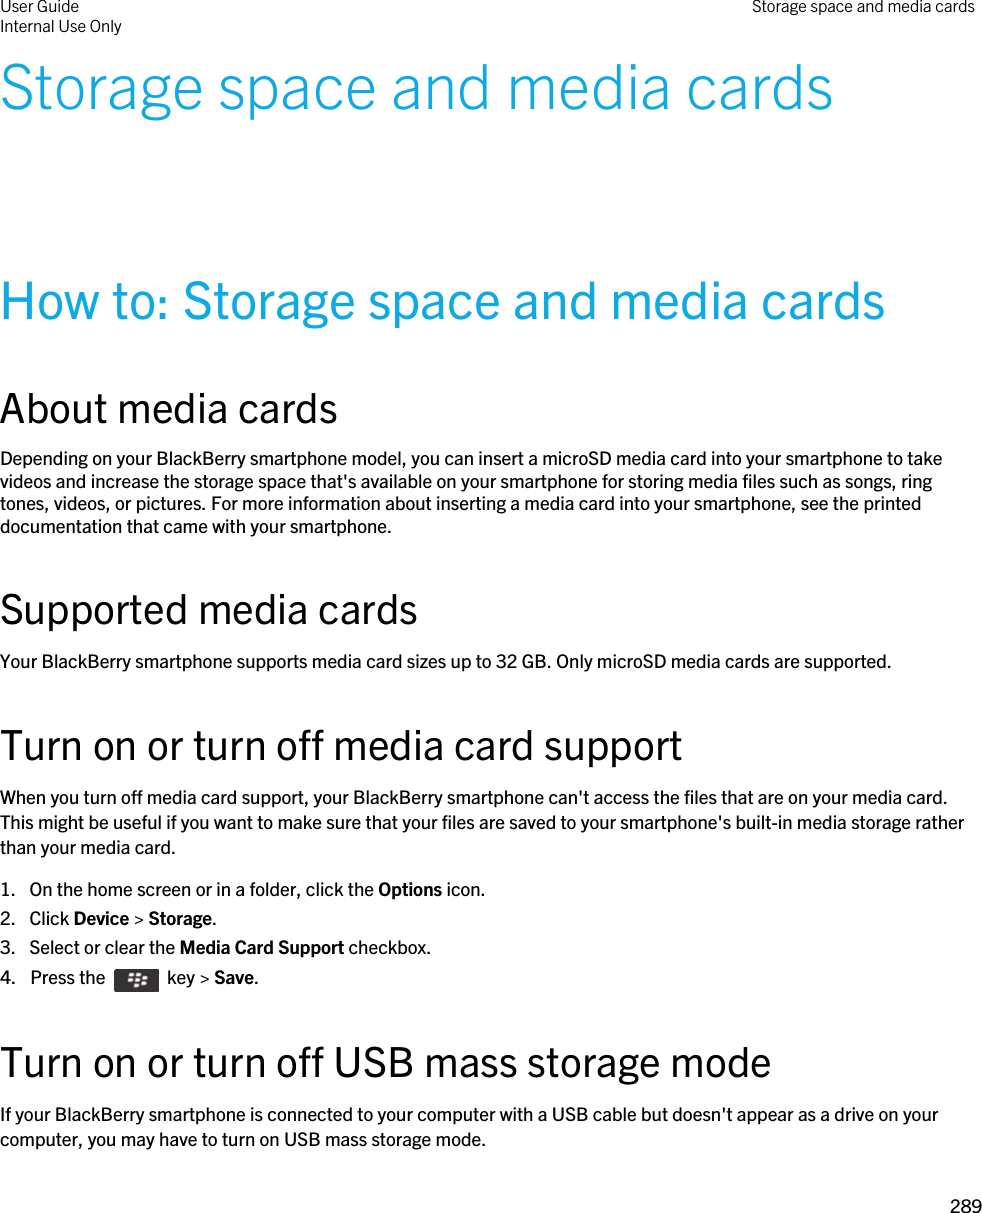 Storage space and media cardsHow to: Storage space and media cardsAbout media cardsDepending on your BlackBerry smartphone model, you can insert a microSD media card into your smartphone to take videos and increase the storage space that&apos;s available on your smartphone for storing media files such as songs, ring tones, videos, or pictures. For more information about inserting a media card into your smartphone, see the printed documentation that came with your smartphone.Supported media cardsYour BlackBerry smartphone supports media card sizes up to 32 GB. Only microSD media cards are supported.Turn on or turn off media card supportWhen you turn off media card support, your BlackBerry smartphone can&apos;t access the files that are on your media card. This might be useful if you want to make sure that your files are saved to your smartphone&apos;s built-in media storage rather than your media card.1. On the home screen or in a folder, click the Options icon.2. Click Device &gt; Storage.3. Select or clear the Media Card Support checkbox.4.  Press the    key &gt; Save. Turn on or turn off USB mass storage modeIf your BlackBerry smartphone is connected to your computer with a USB cable but doesn&apos;t appear as a drive on your computer, you may have to turn on USB mass storage mode.User GuideInternal Use Only Storage space and media cards289 